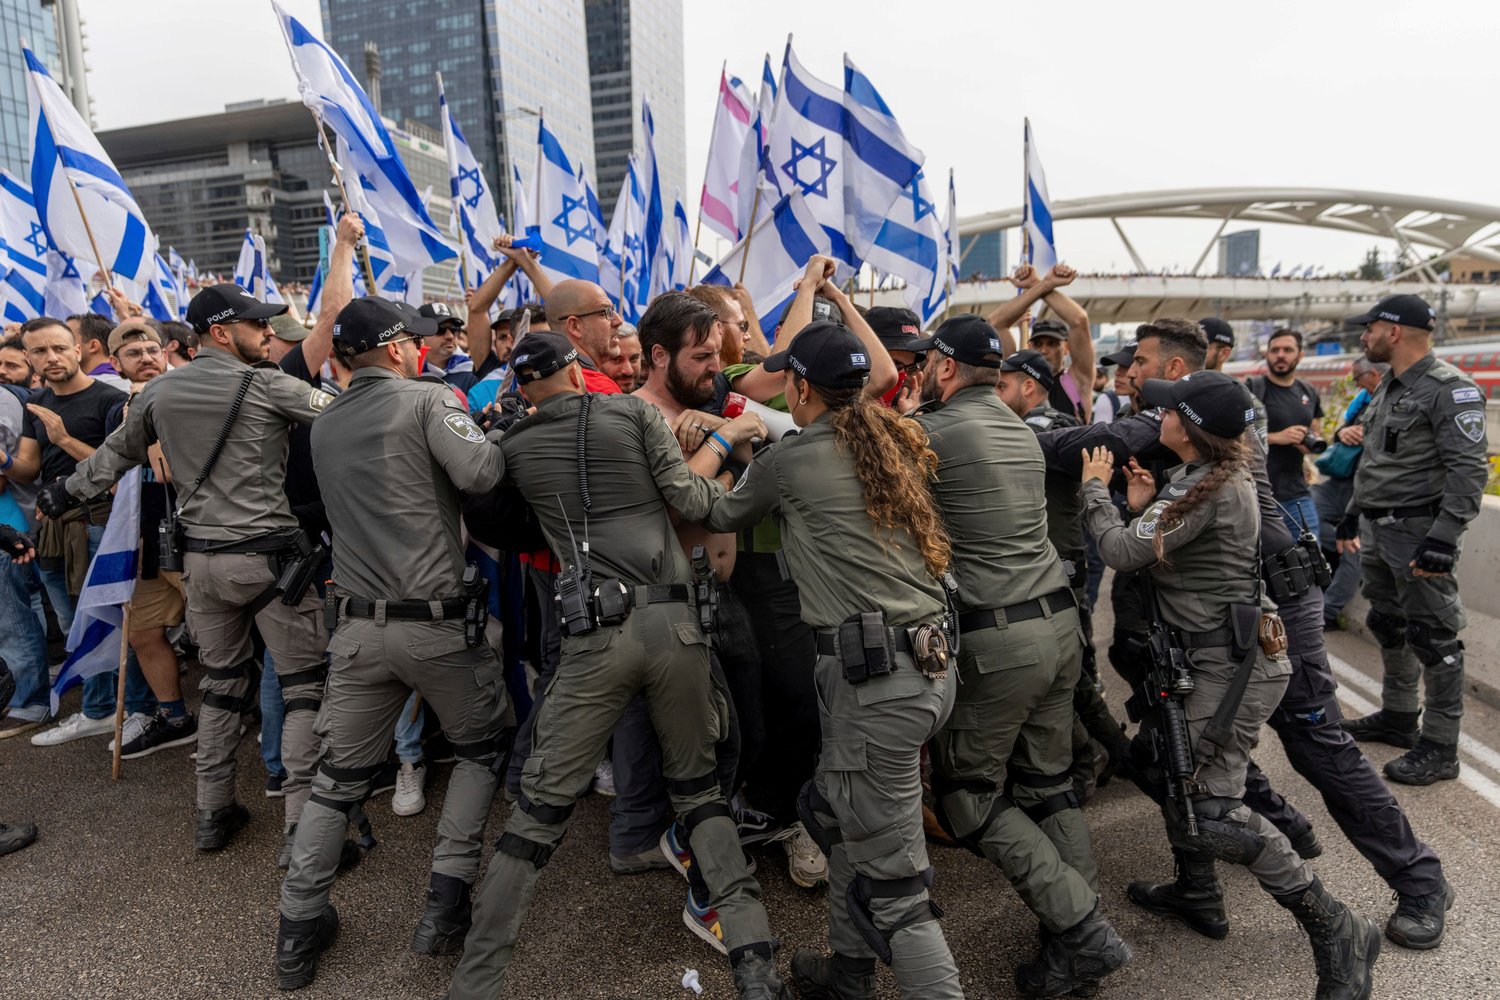 Israeli police scuffle with demonstrators blocking a road during a protest against plans by Prime Minister Benjamin Netanyahu's government to overhaul the judicial system in Tel Aviv, Israel, March 23.